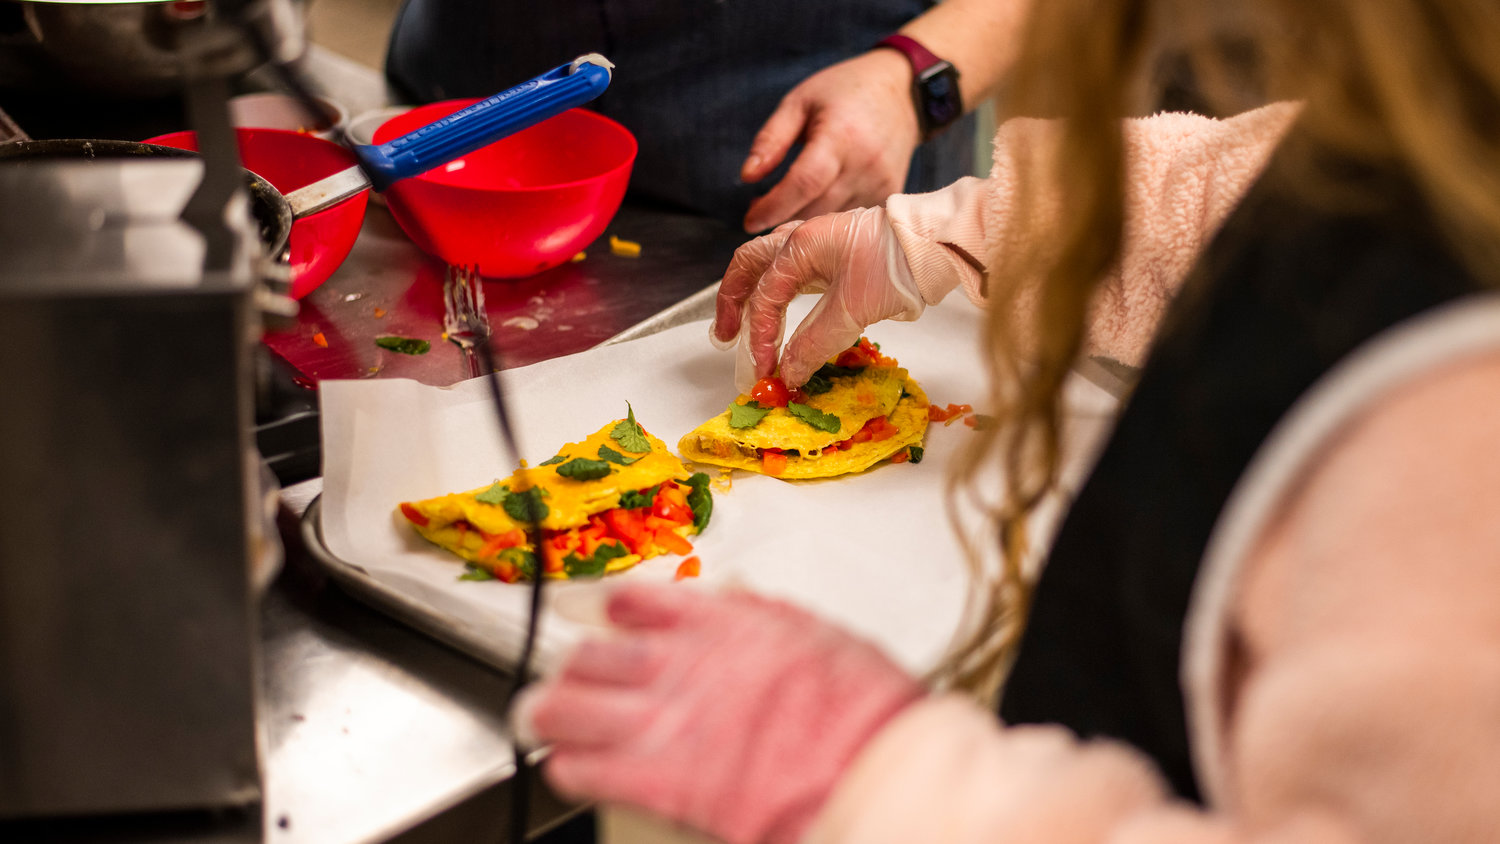 Dishes are prepared by students inside The Cougar Cafe kitchen at Orin C. Smith Elementary in Chehalis on Monday.